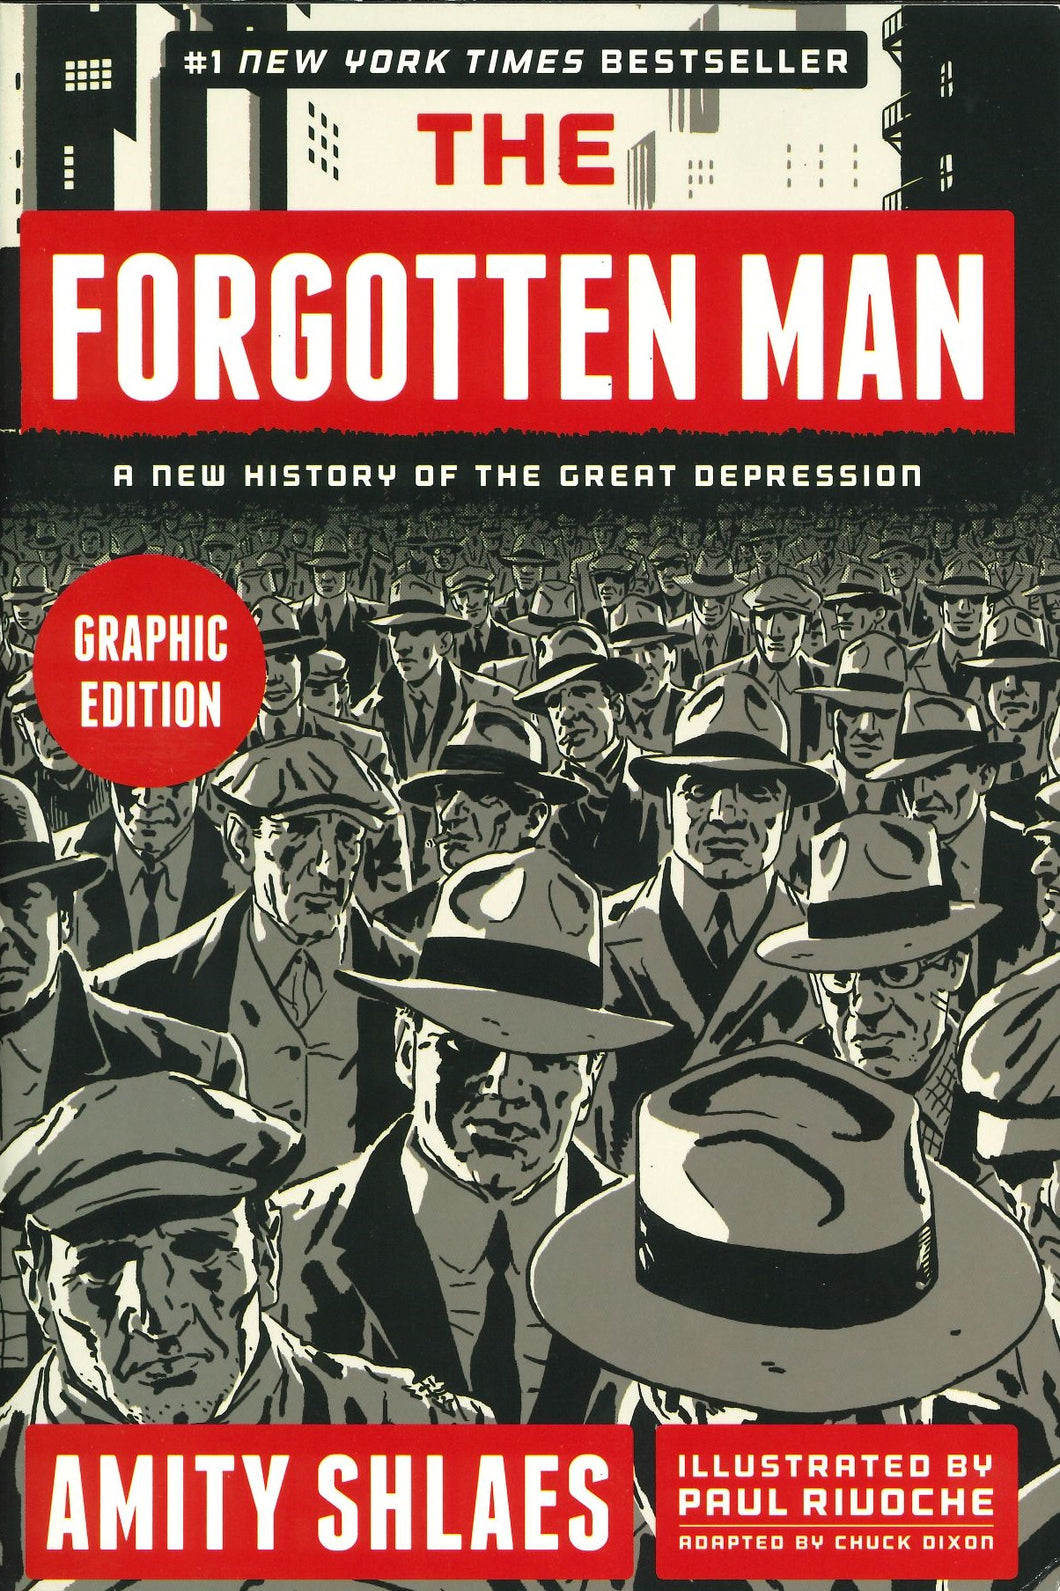 The Forgotten Man - Graphic Novel by Amity Shlaes, illustrated by Paul Rivoche